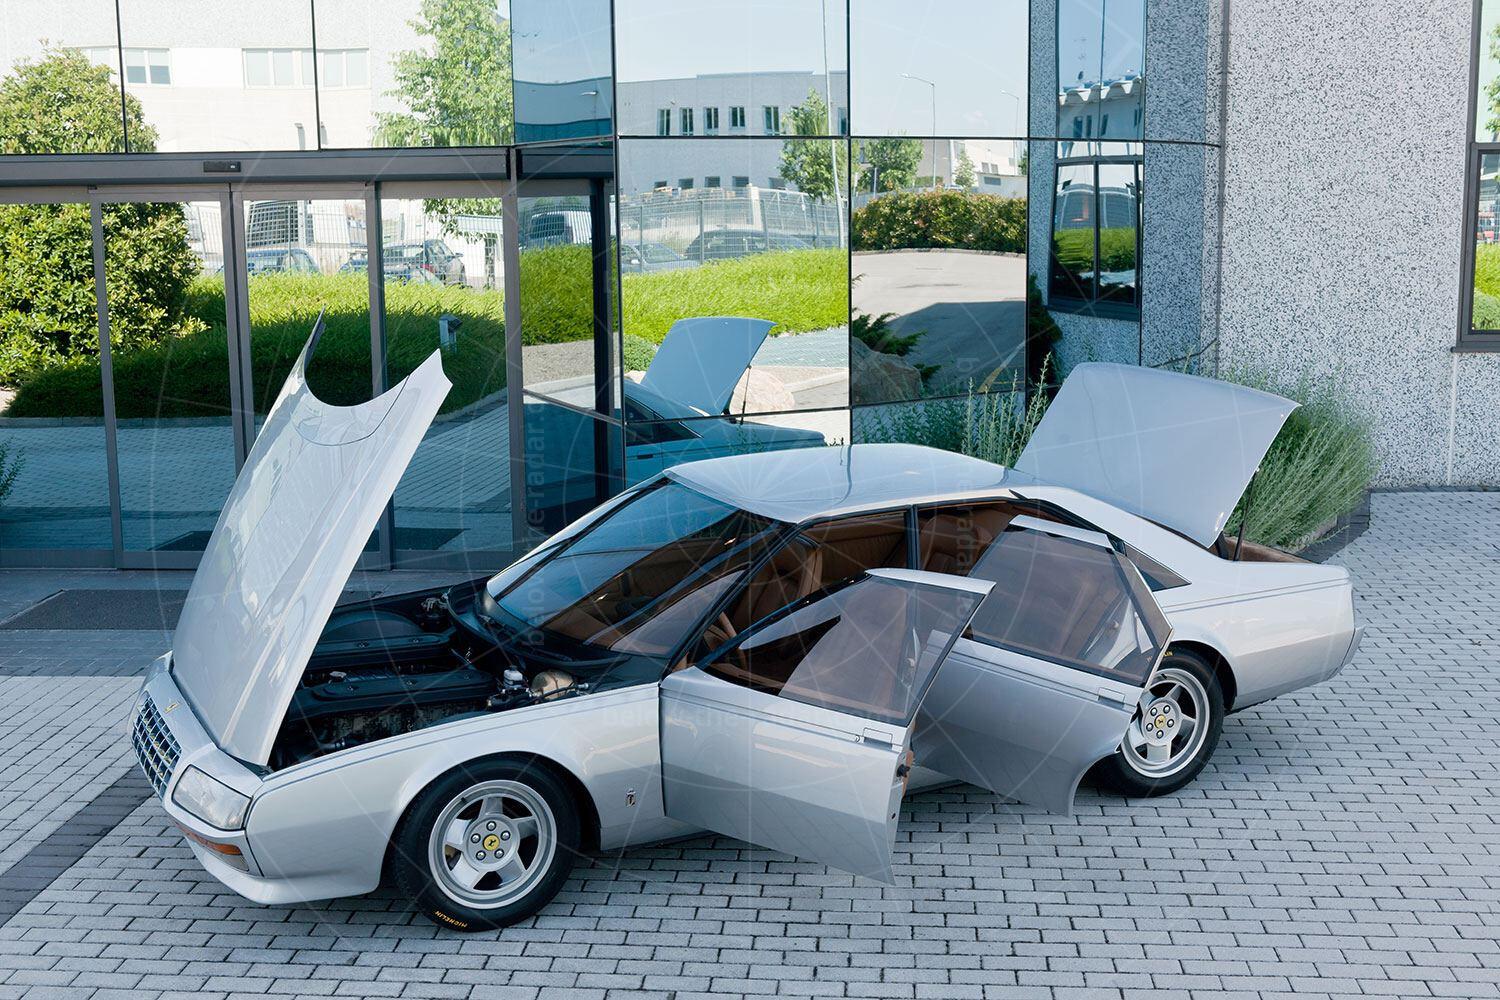 The Ferrari Pinin pictured in 2011 Pic: RM Sotheby's | The Ferrari Pinin pictured in 2011